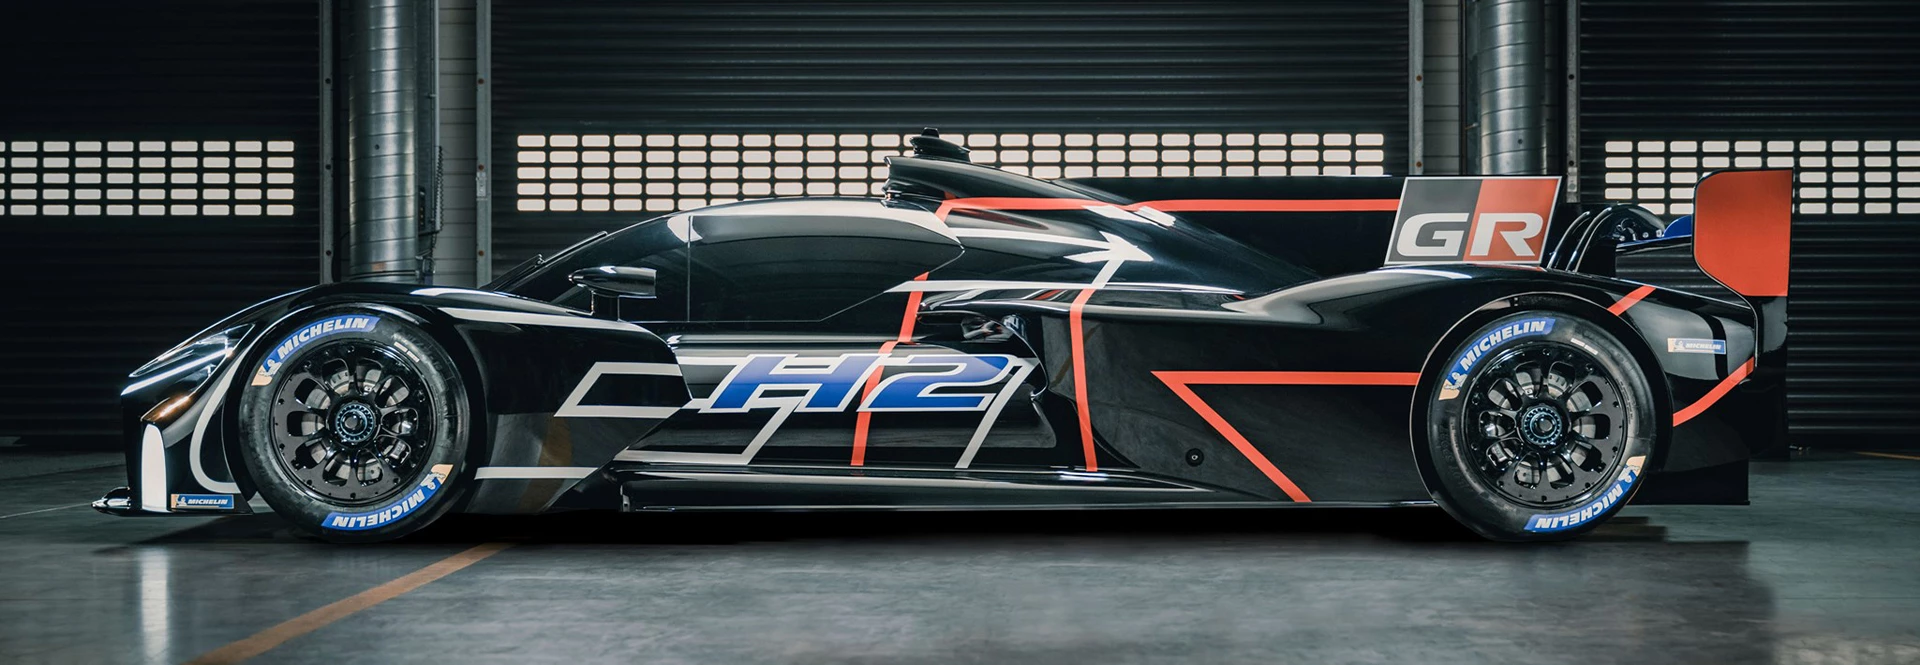 News Landing Image TOYOTA GAZOO Racing Unveils GR H2 Racing Concept at Le Mans 24 Hours